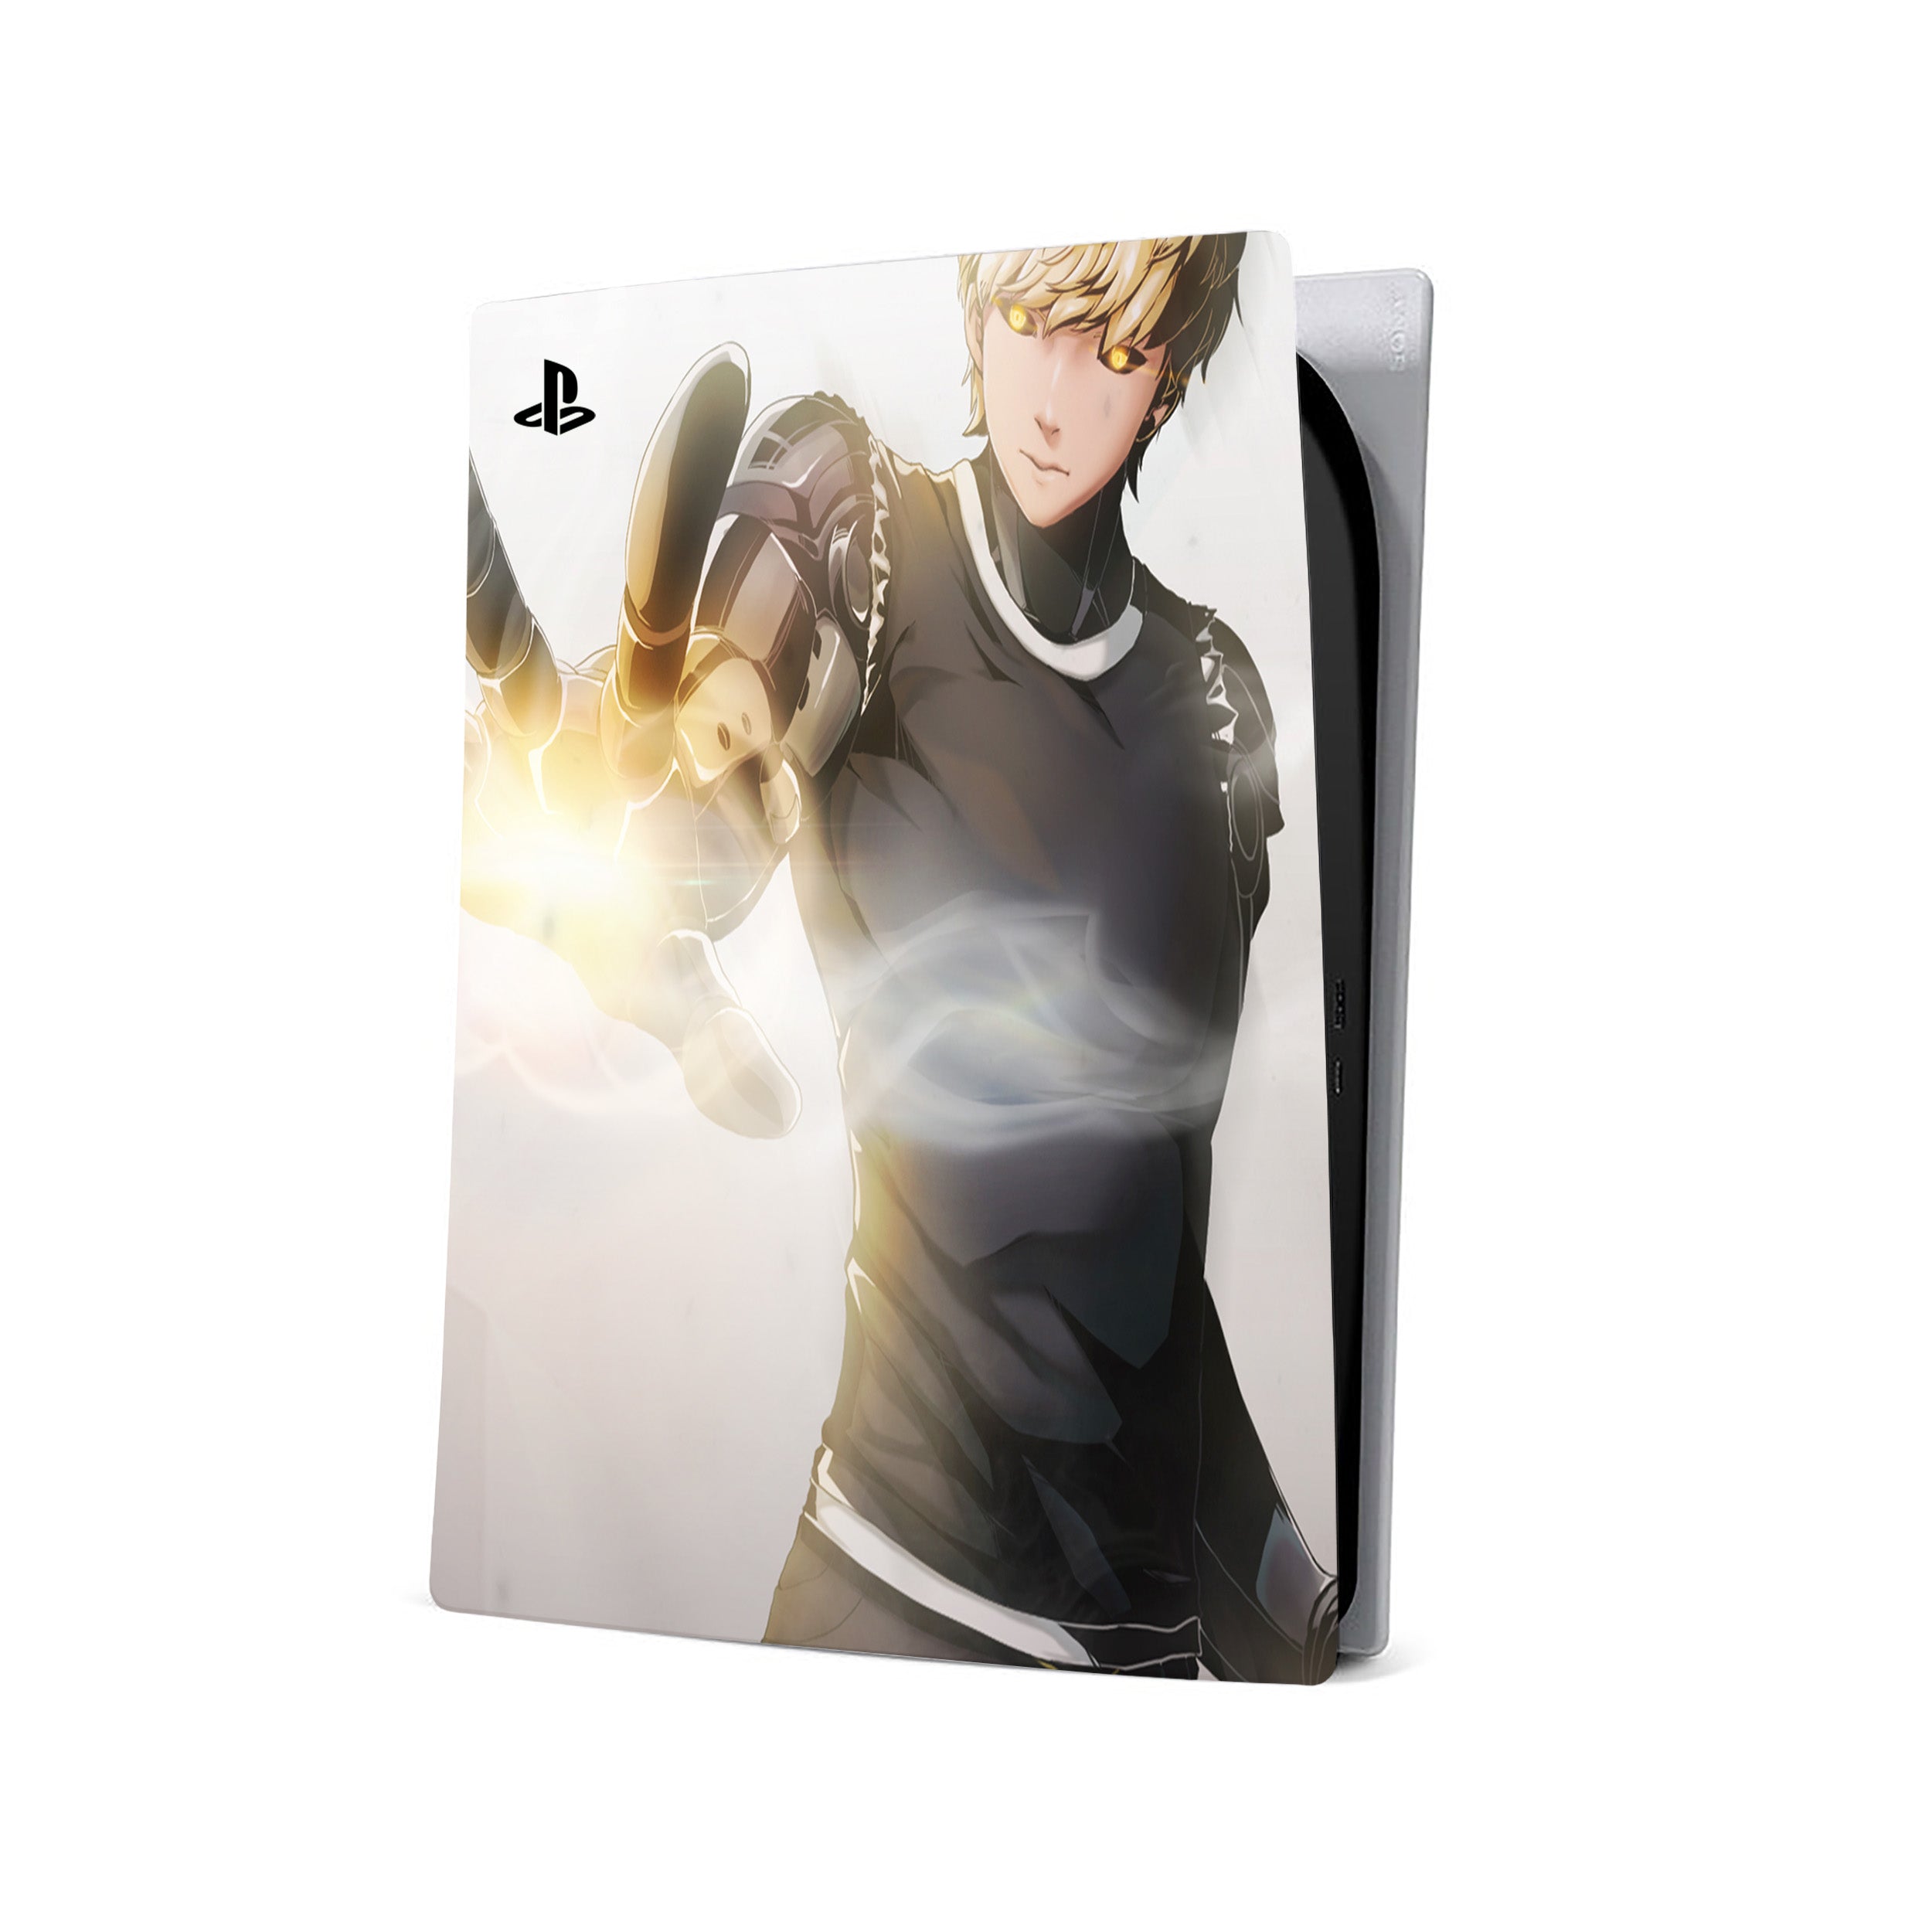 A video game skin featuring a One Punch Man Genos design for the PS5.